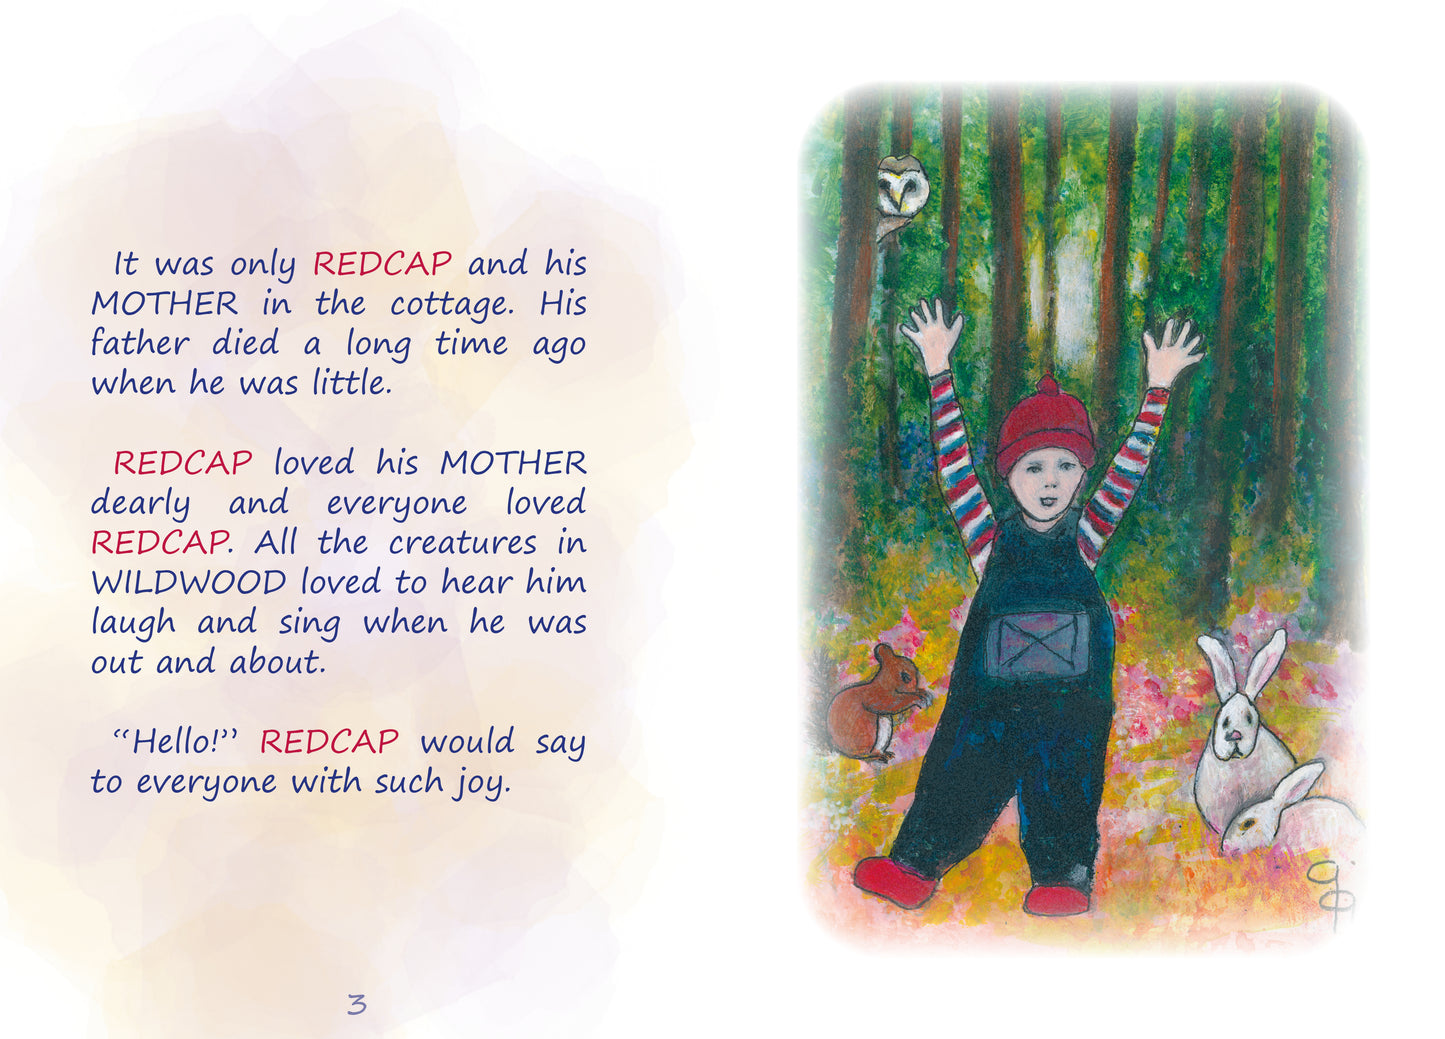 REDCAP | Written by June Mari Louise Lipka, illustrated by Ginger Gilmour